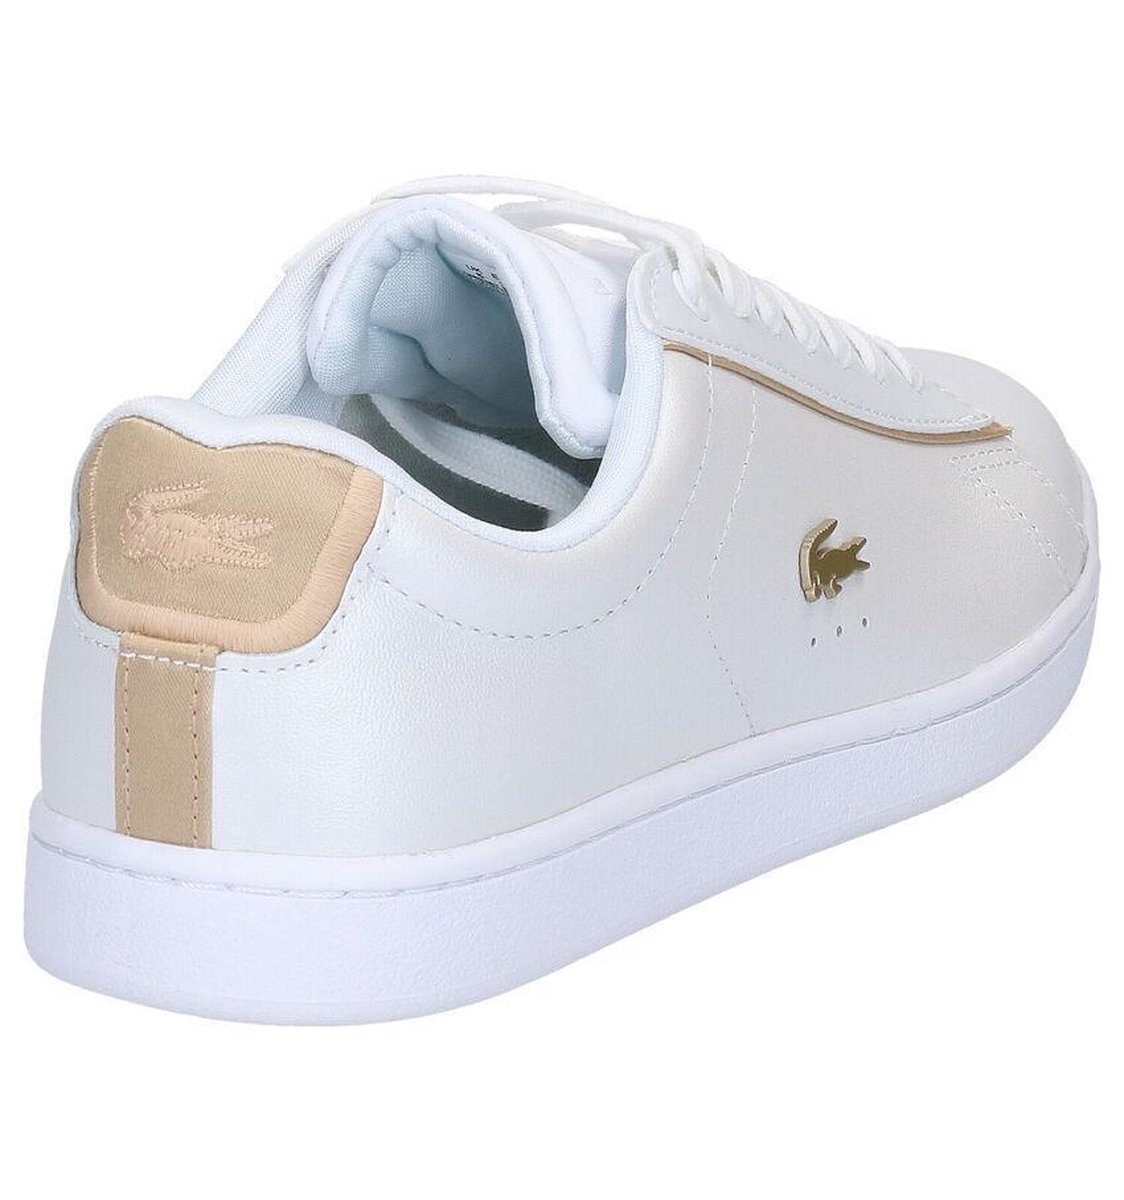 Lacoste Carnaby Evo Witte Sneakers Dames 41 | bol.com